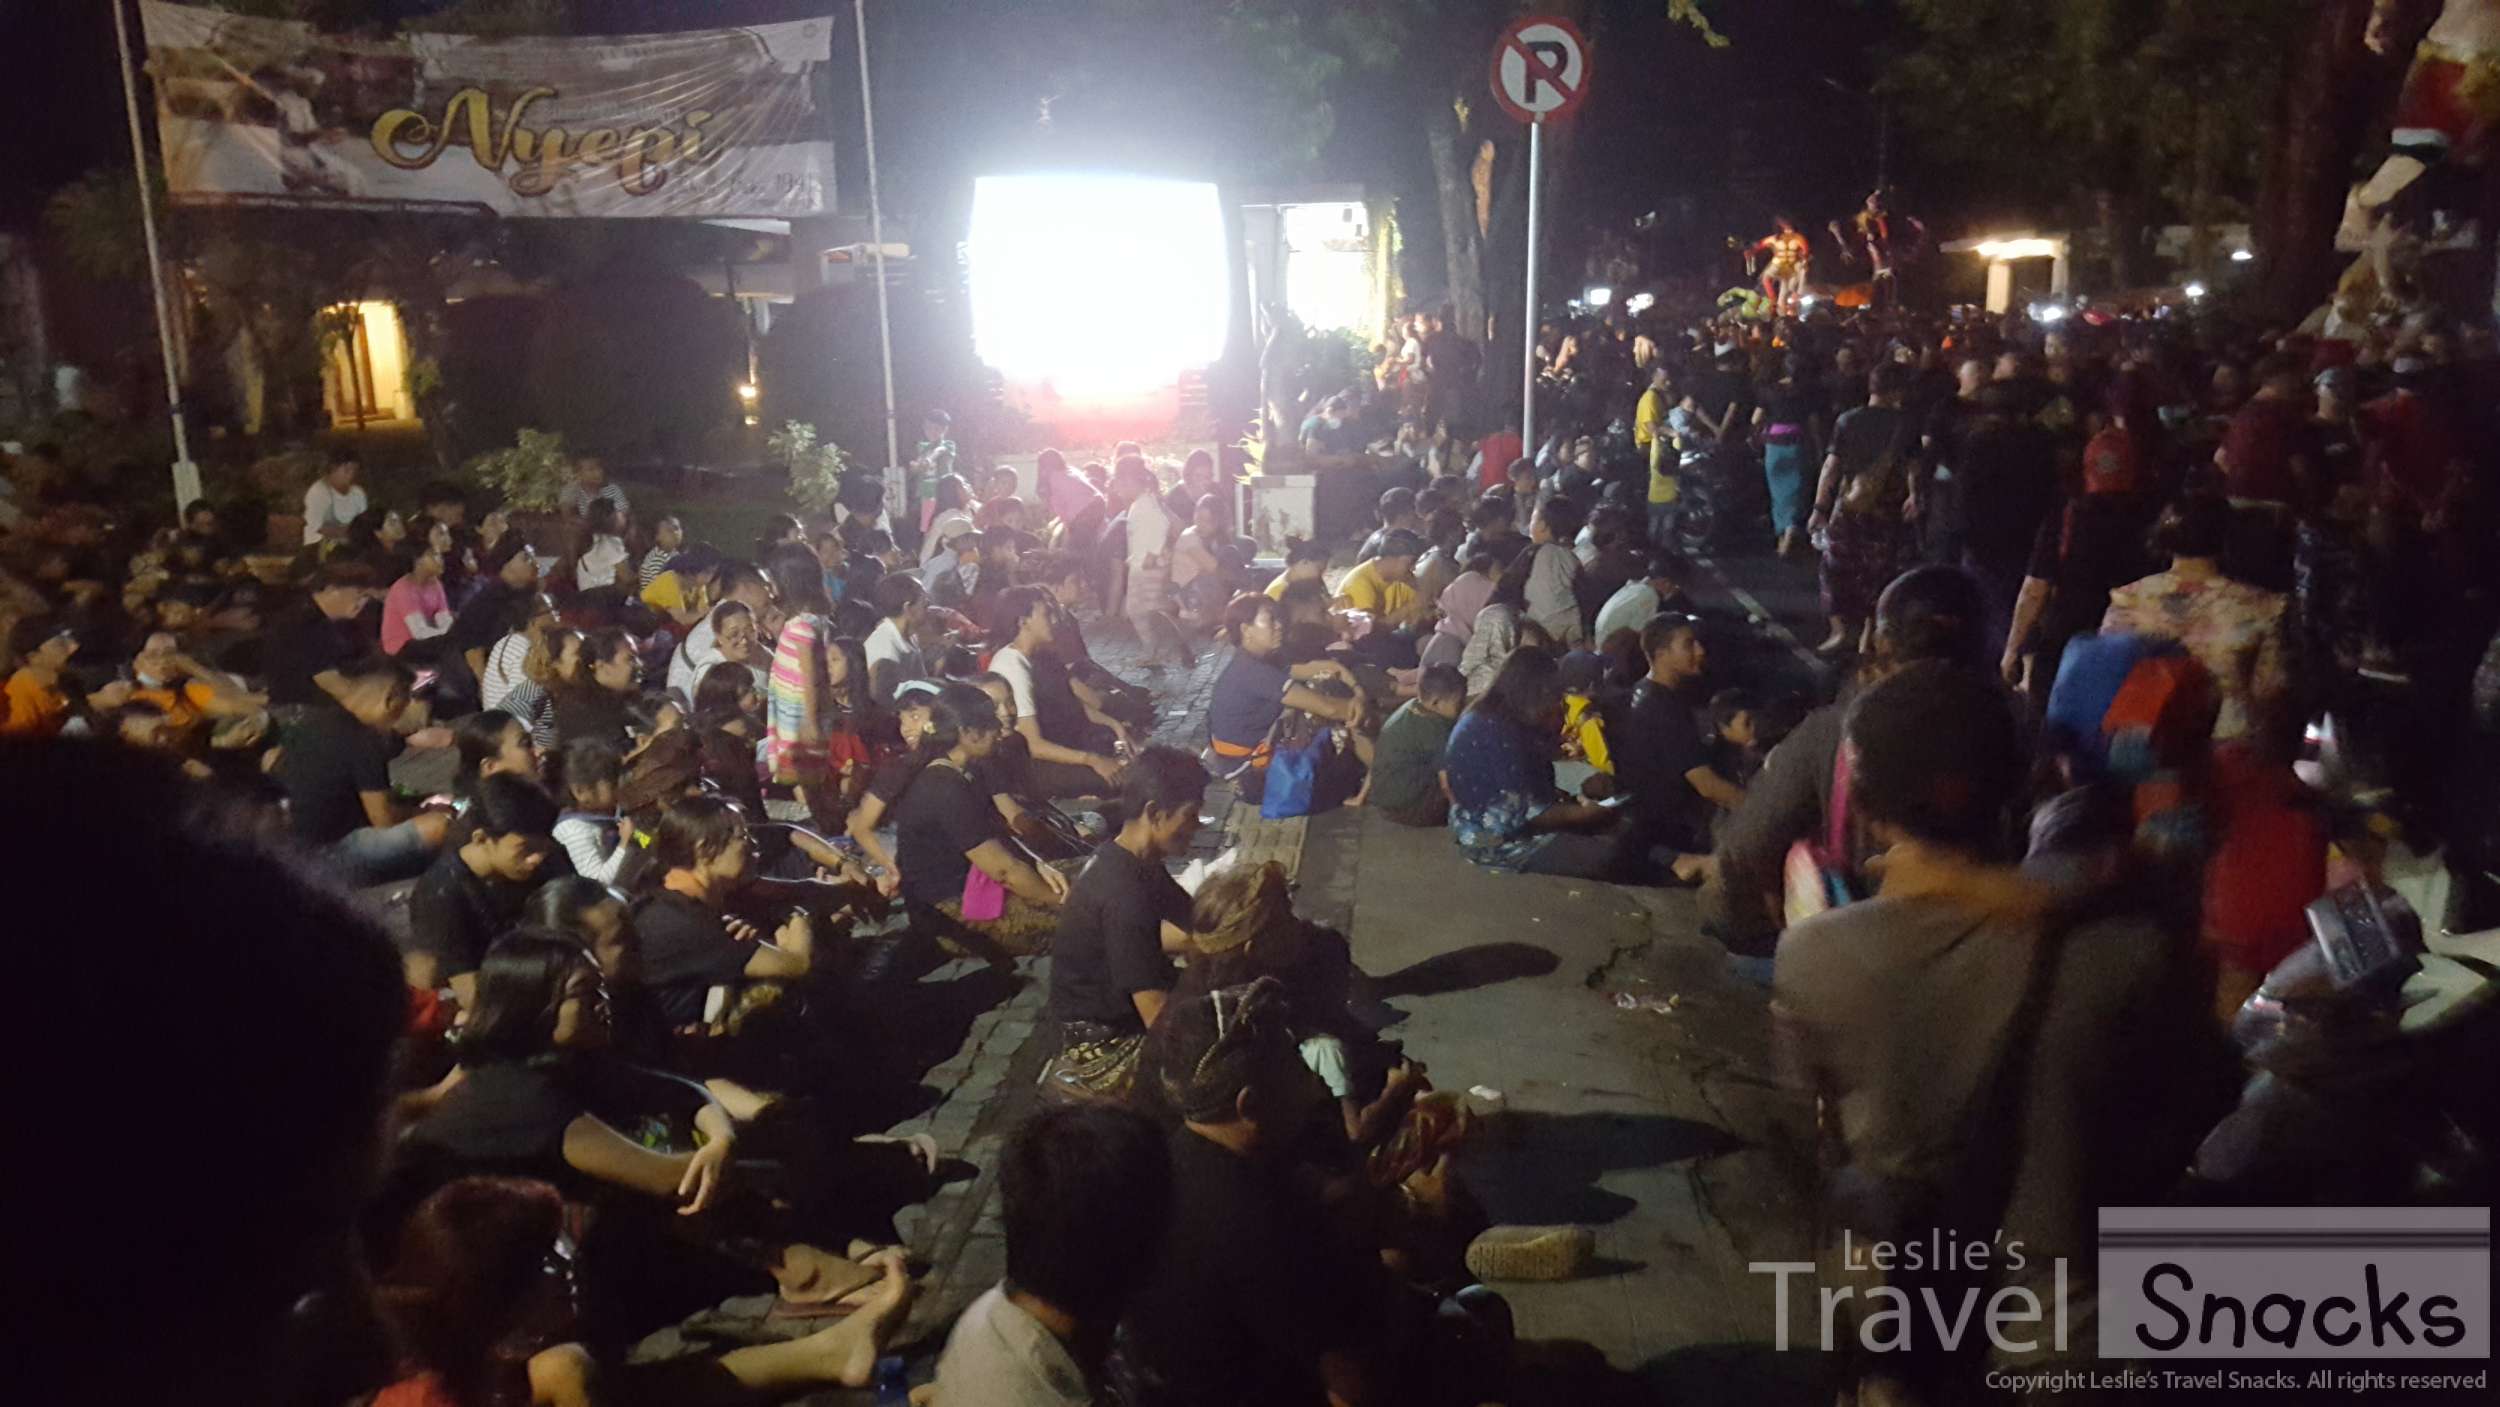 In front of the Inna Bali Heritage Hotel, people sit and watch as the procession waits for its turn to enter the main roundabout.